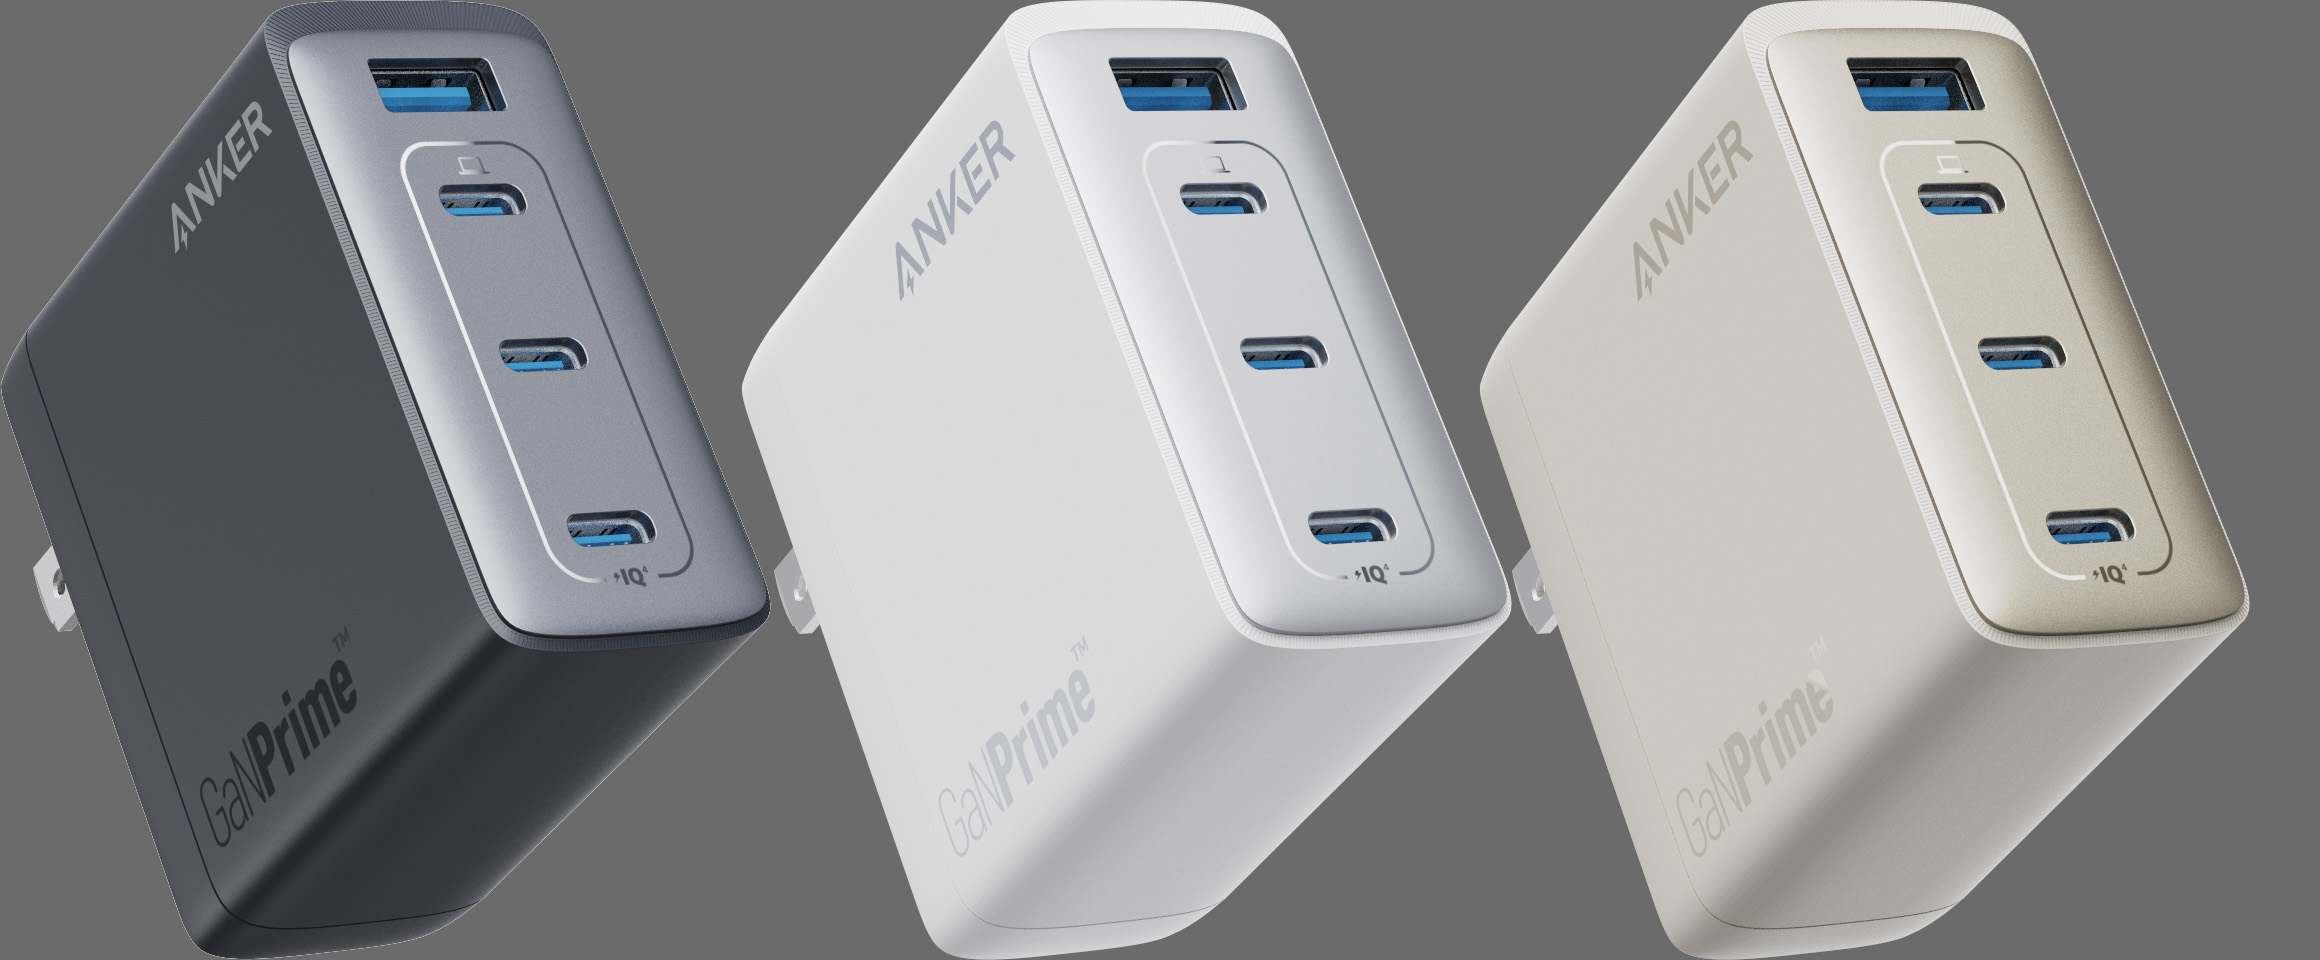 Anker's new GaNPrime charger lineup is cranking out up to 150 W of